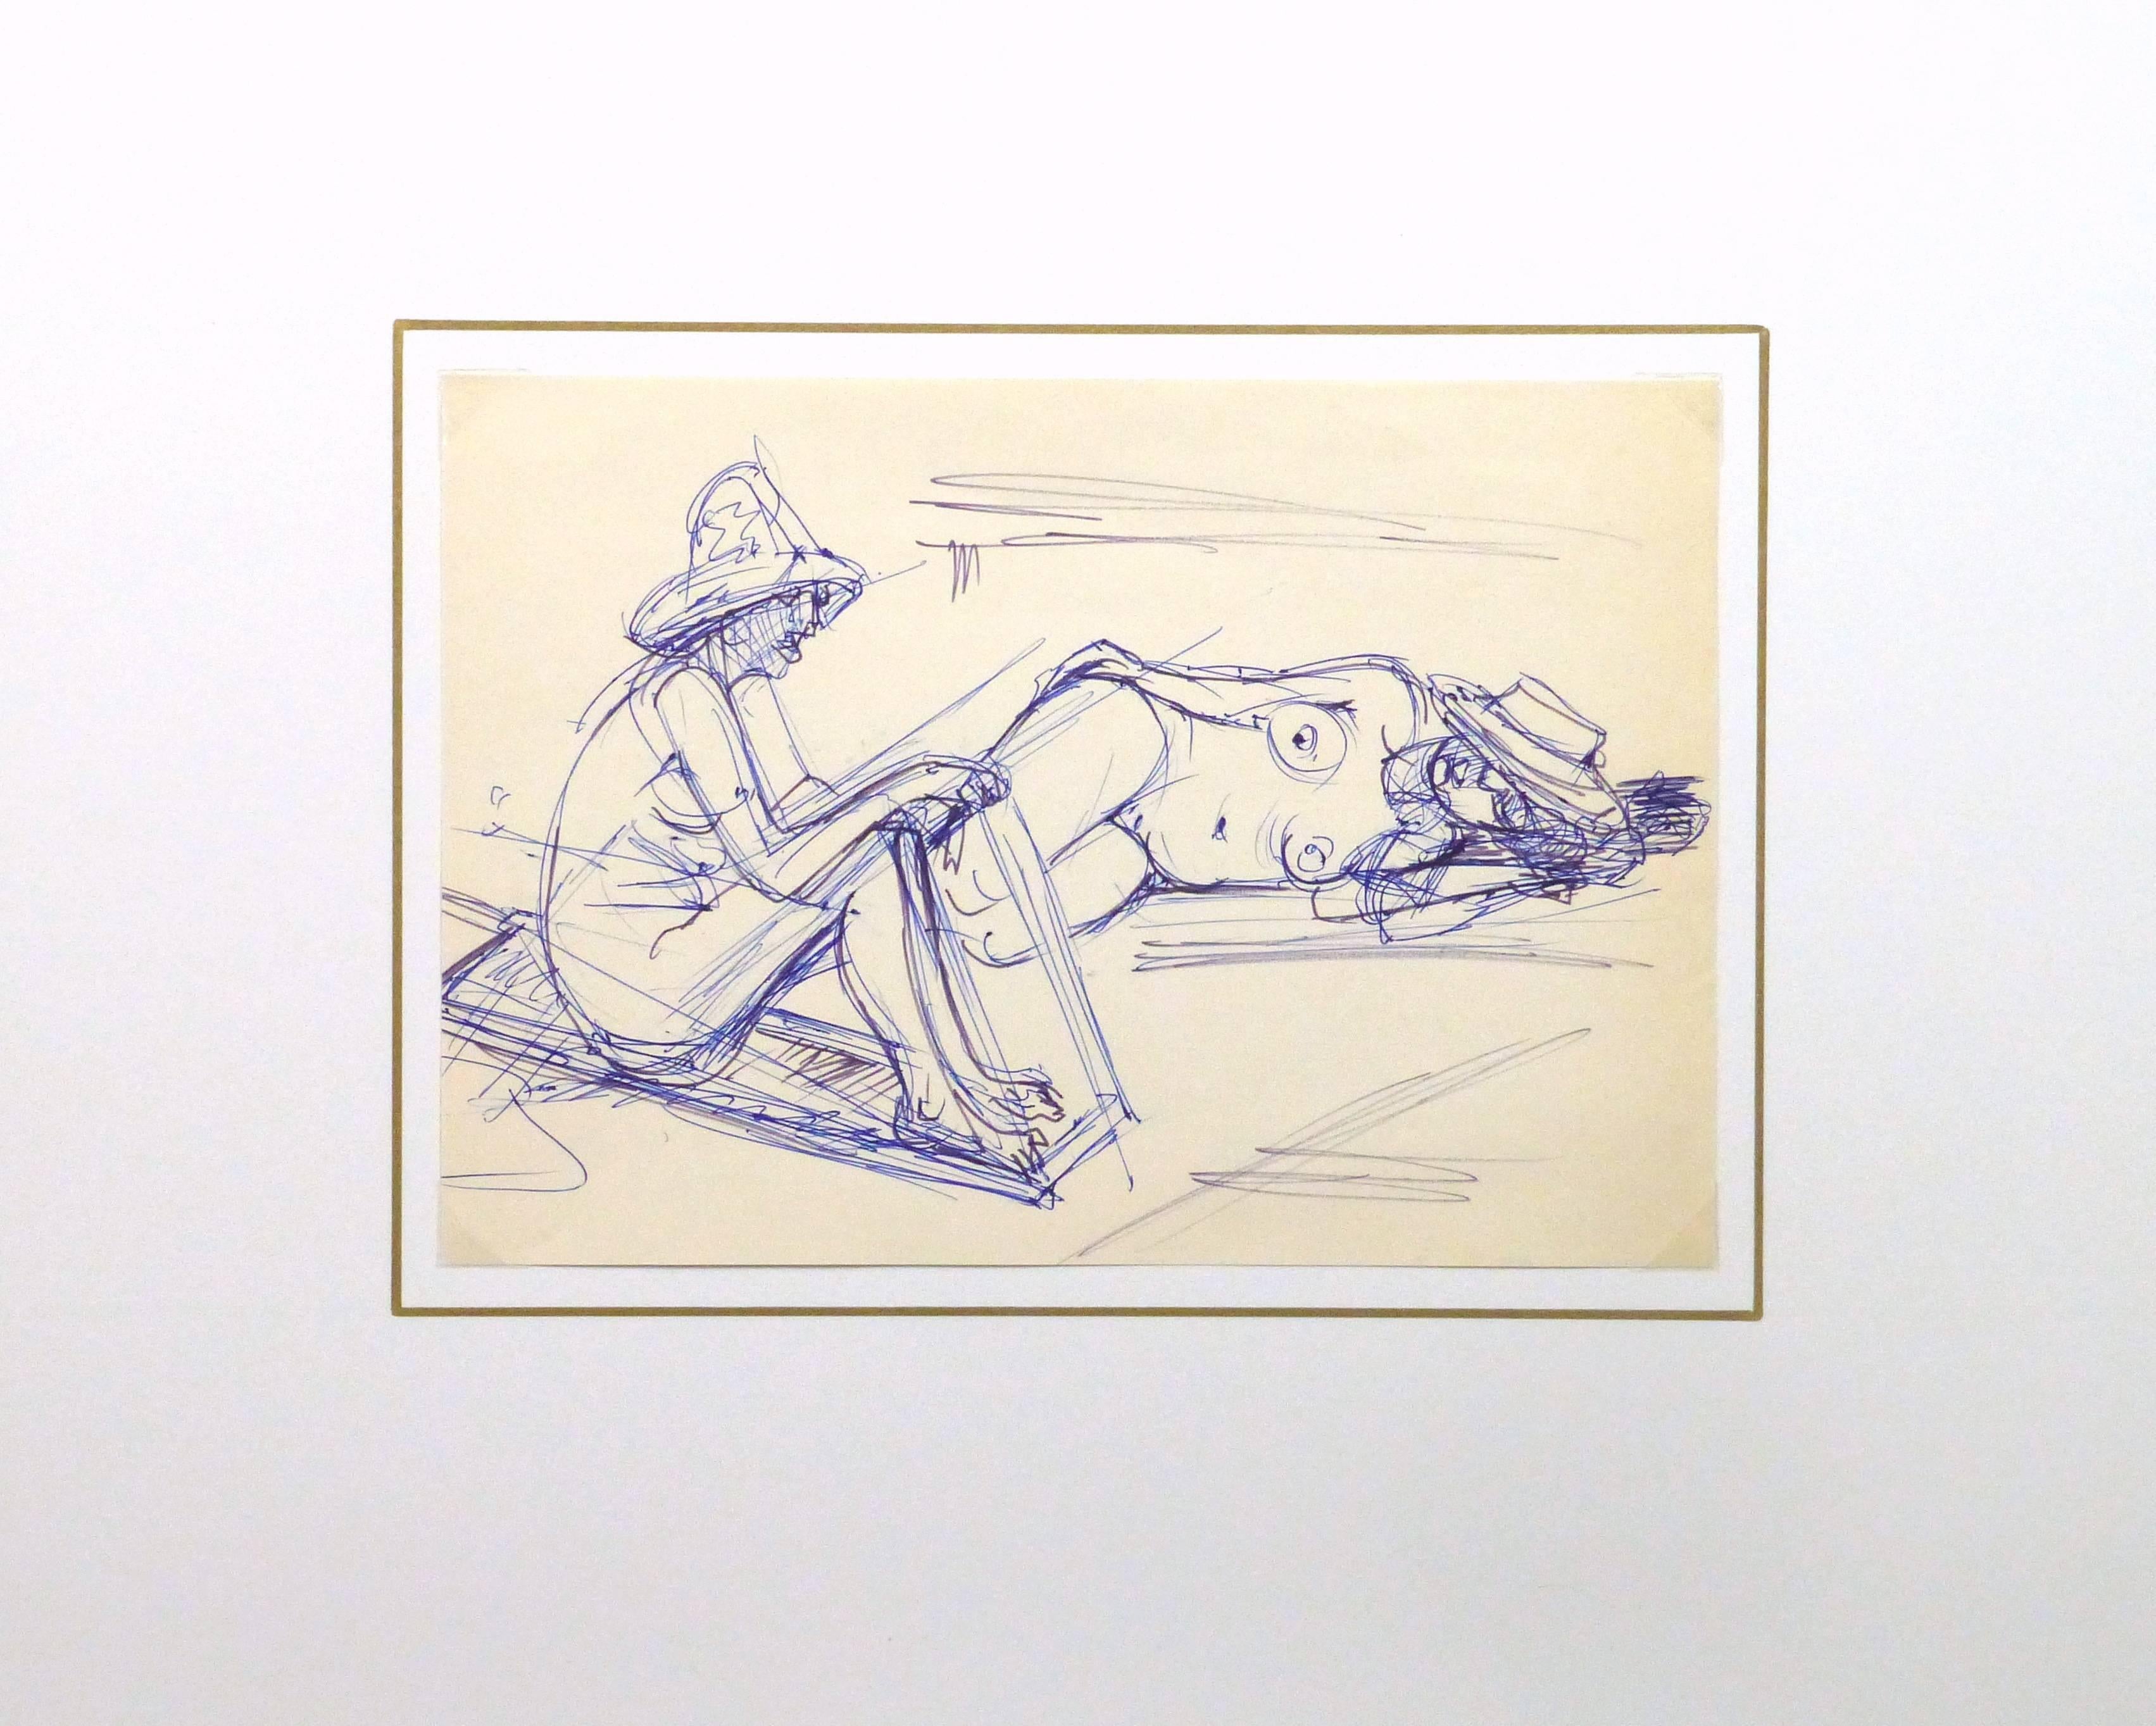 Ink drawing of two female figures enjoying an afternoon of nude sunbathing by artist Irmgard von Reppert, circa 1960.

Original artwork on paper displayed on a white mat with a gold border. Archival plastic sleeve and Certificate of Authenticity